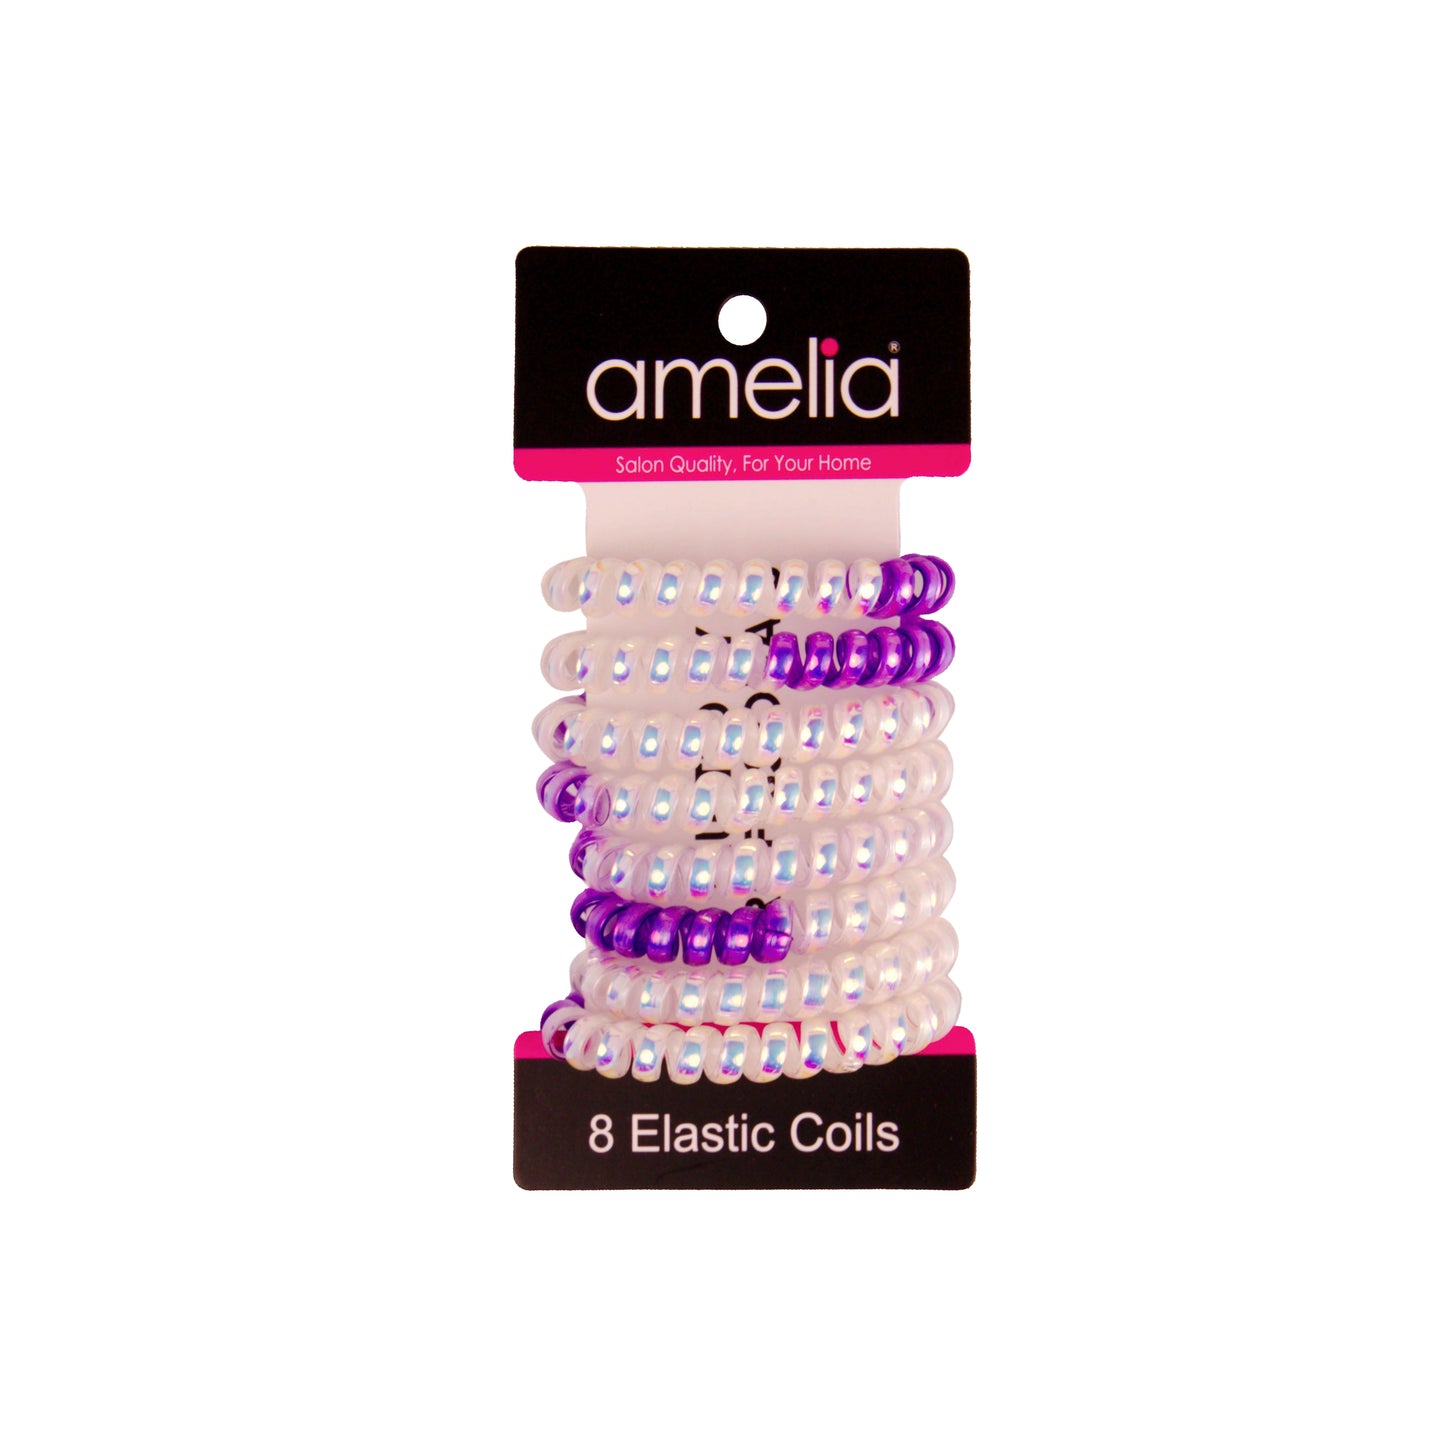 Amelia Beauty Products 8 Medium Smooth Elastic Mutli-Colored Hair Coils, 2.25in Diameter Spiral Hair Ties, Gentle Yet Strong Hold and Minimizes Dents, Purple/Silver